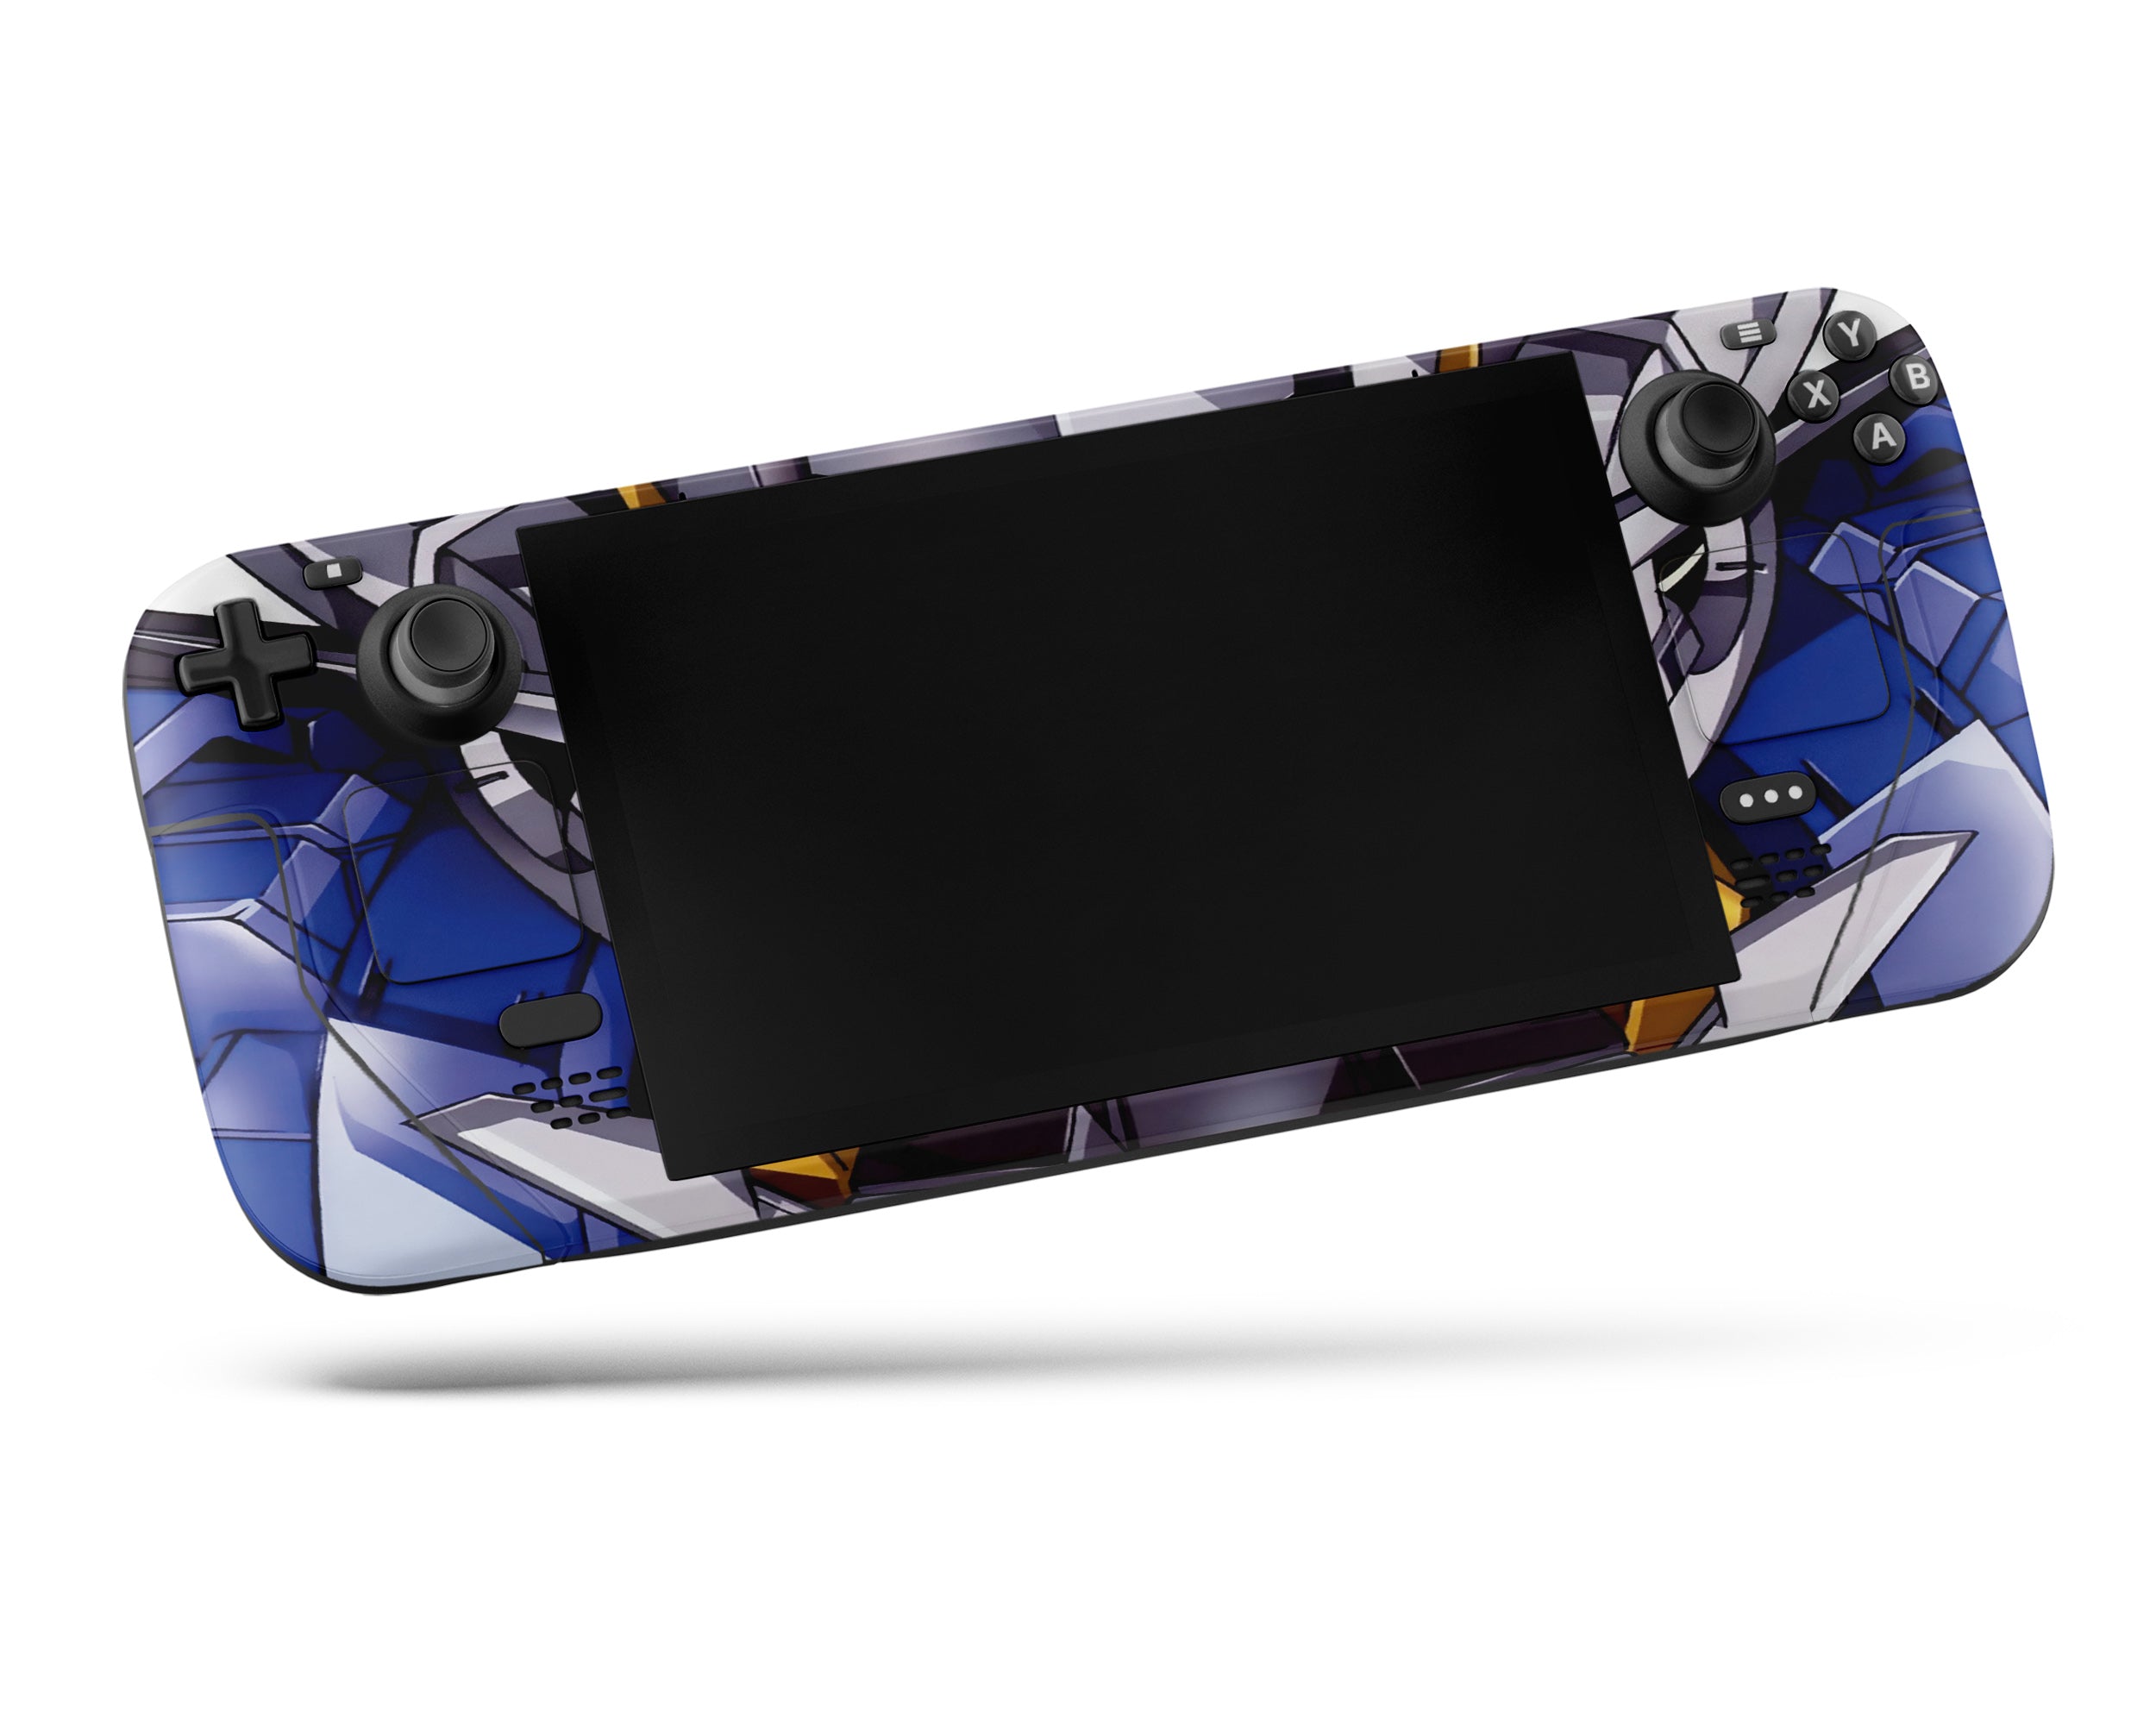 Full Set Protective Skin Decal For Steam Deck, Custom Stickers Vinyl Cover  For Steam Deck Handheld Gaming PC - Walmart.com